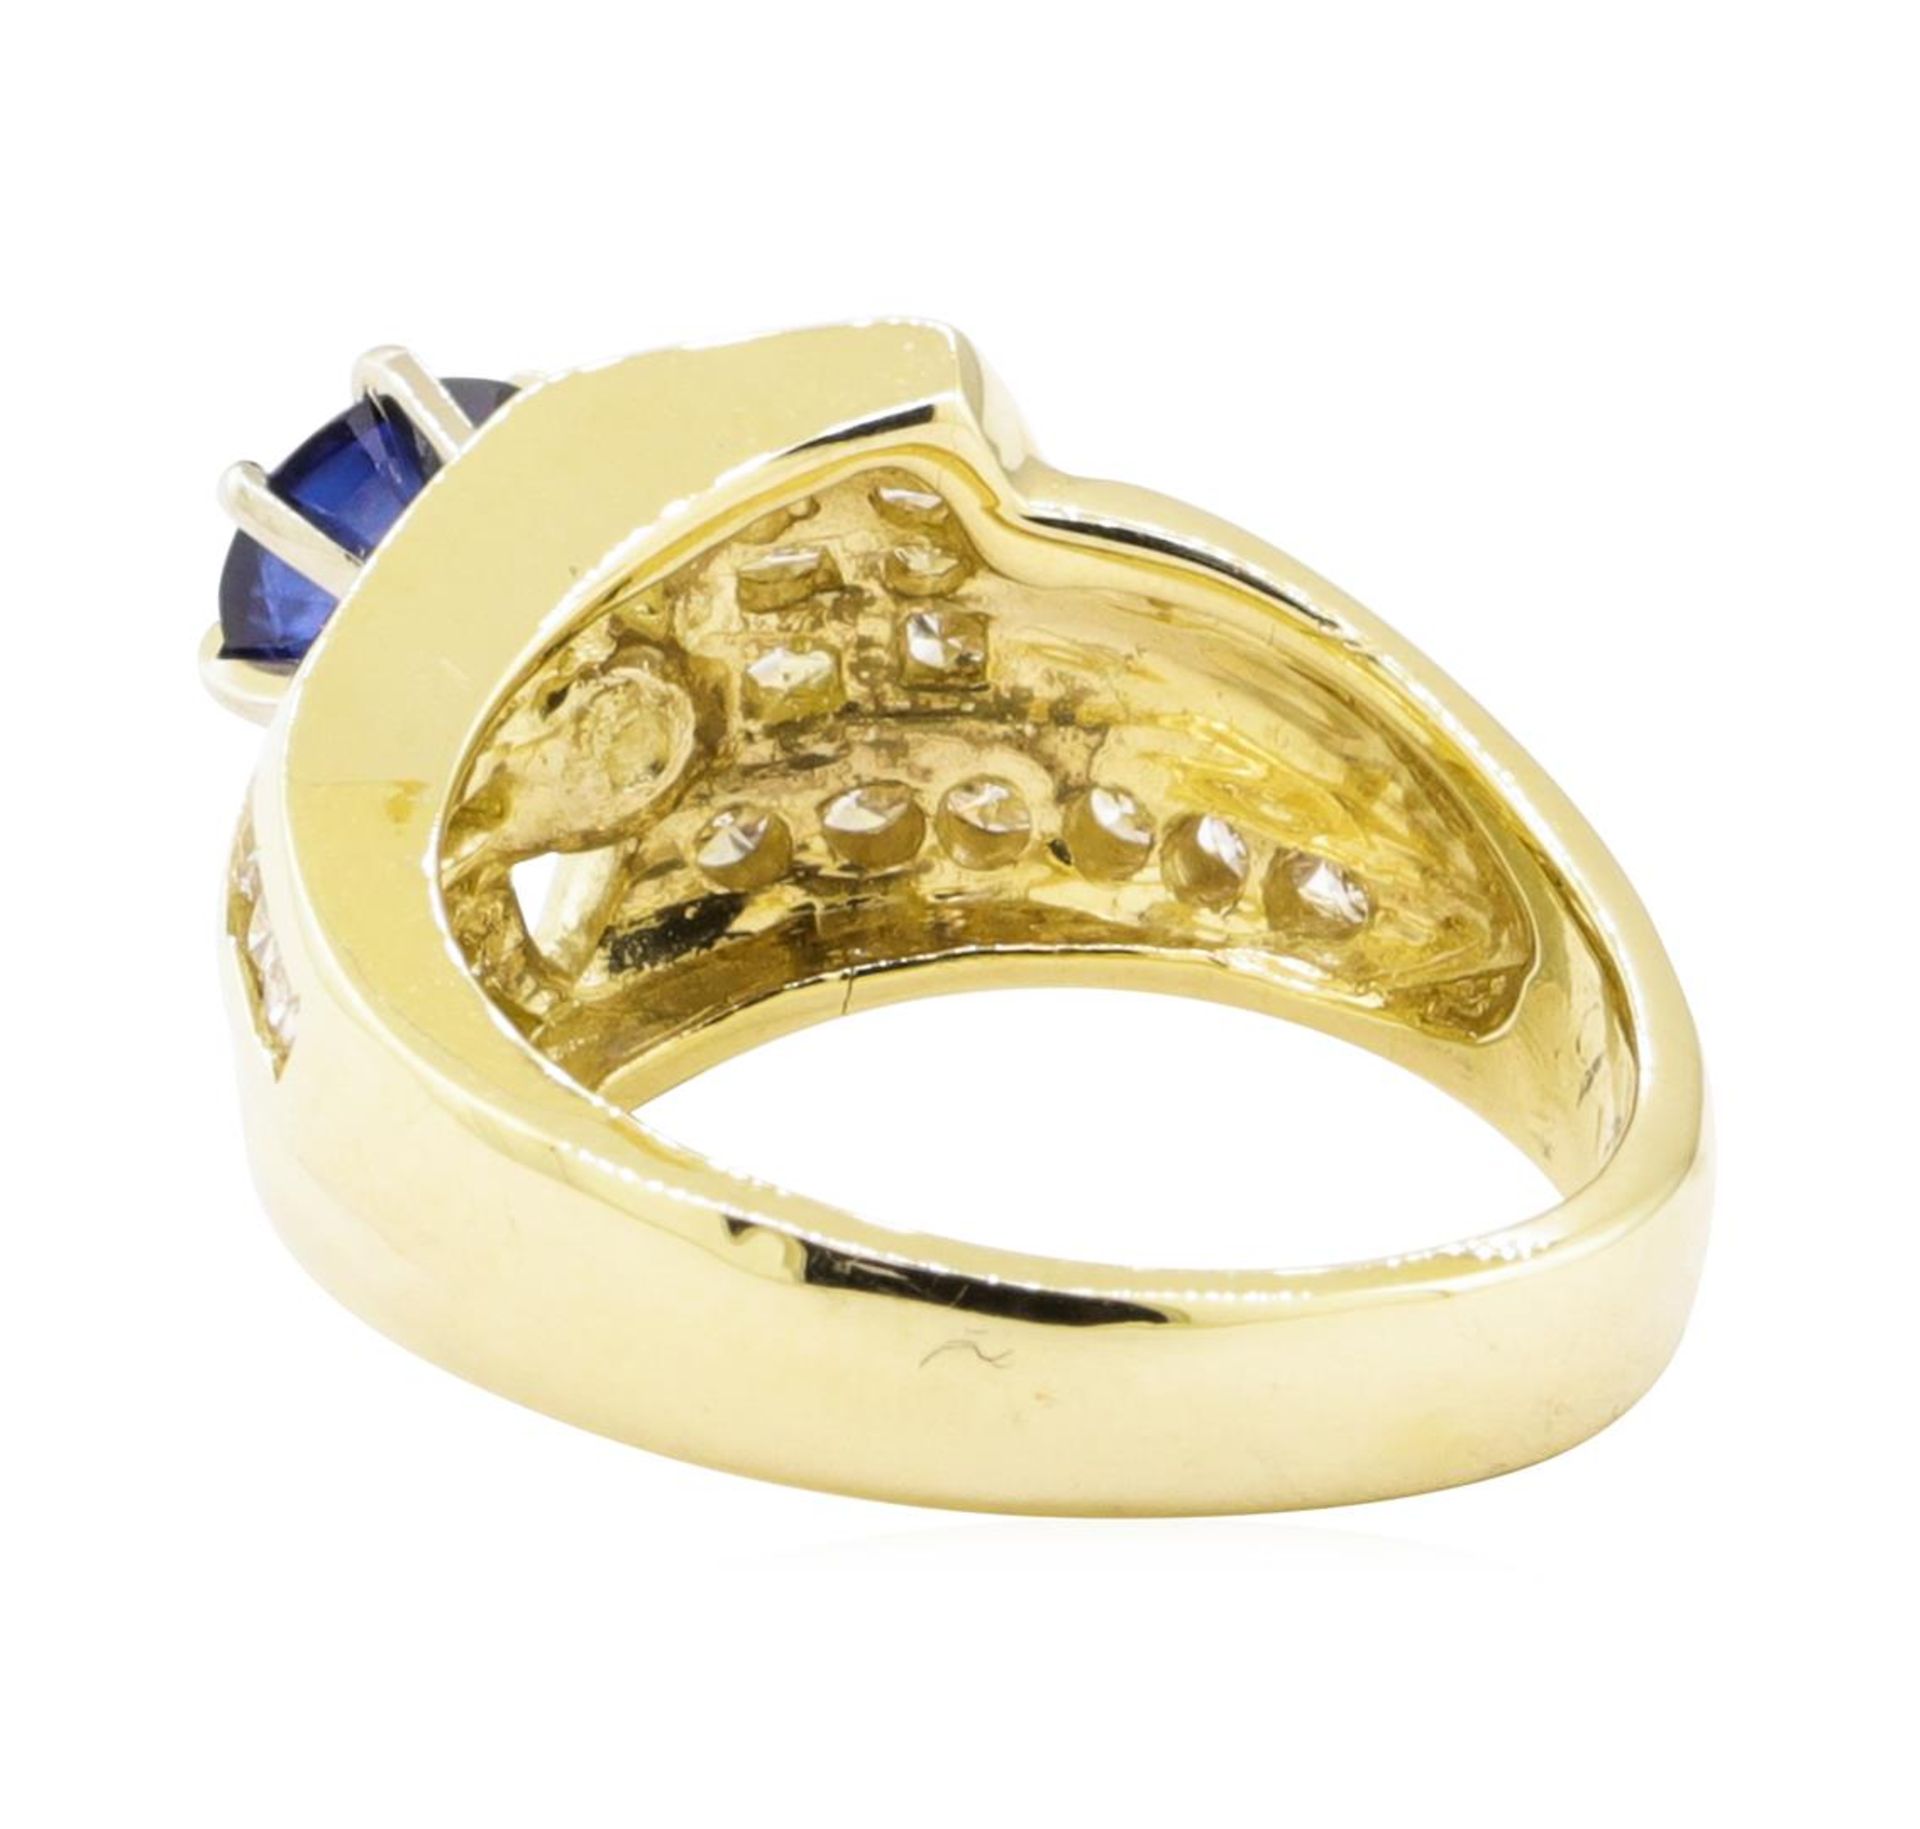 1.77 ctw Blue Sapphire And Diamond Ring - 14KT Yellow Gold - Image 3 of 5